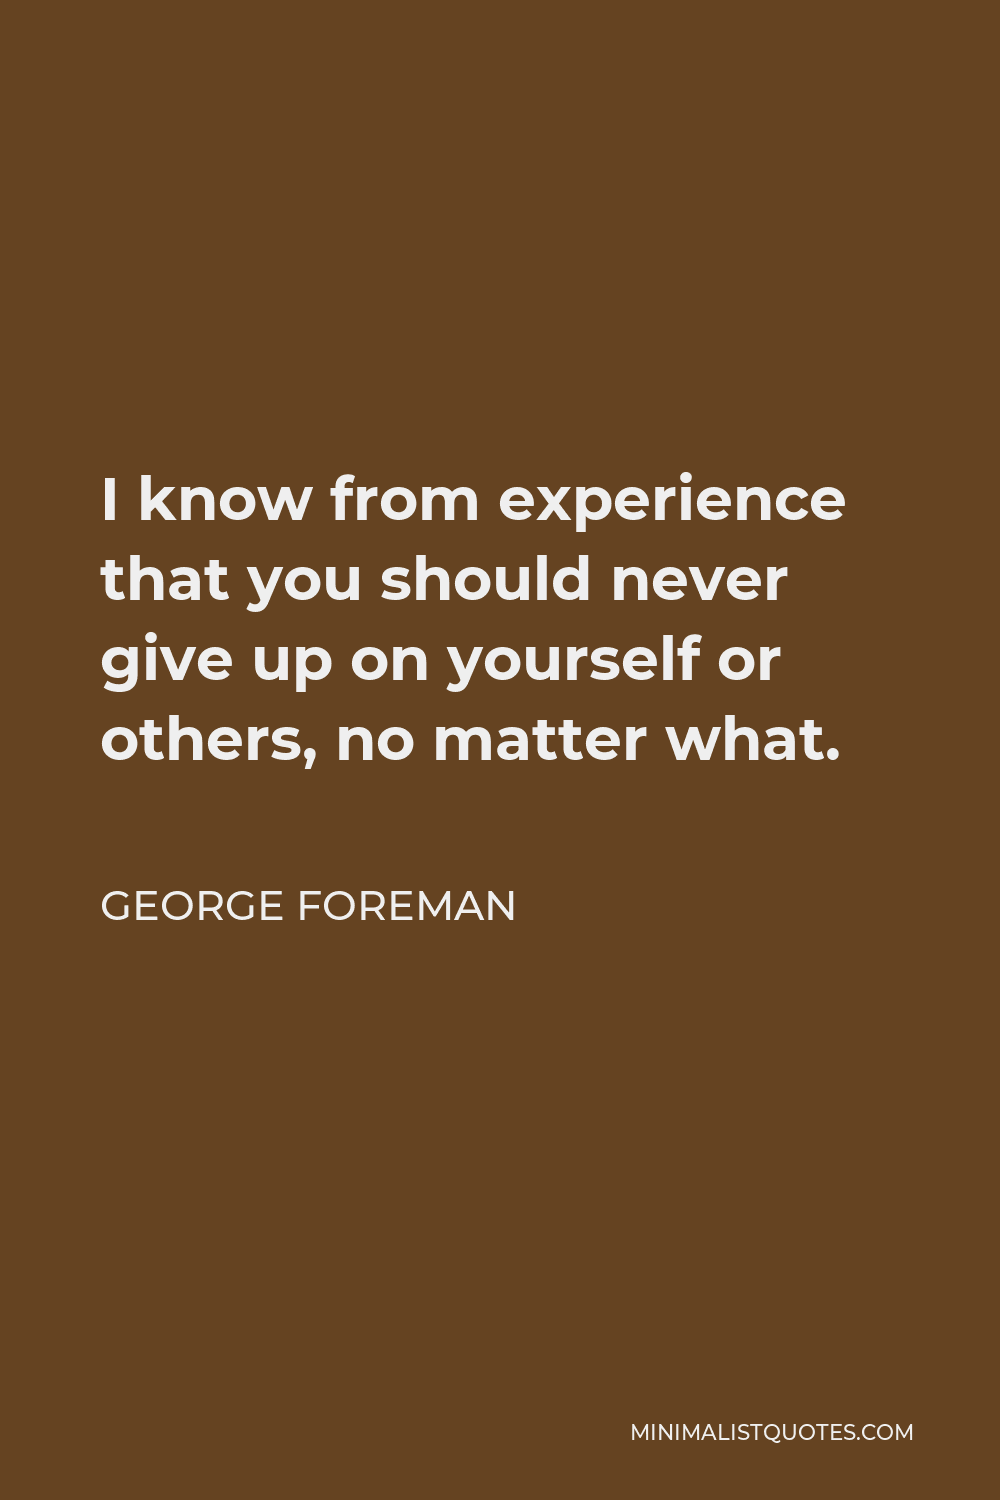 George Foreman Quote - I know from experience that you should never give up on yourself or others, no matter what.